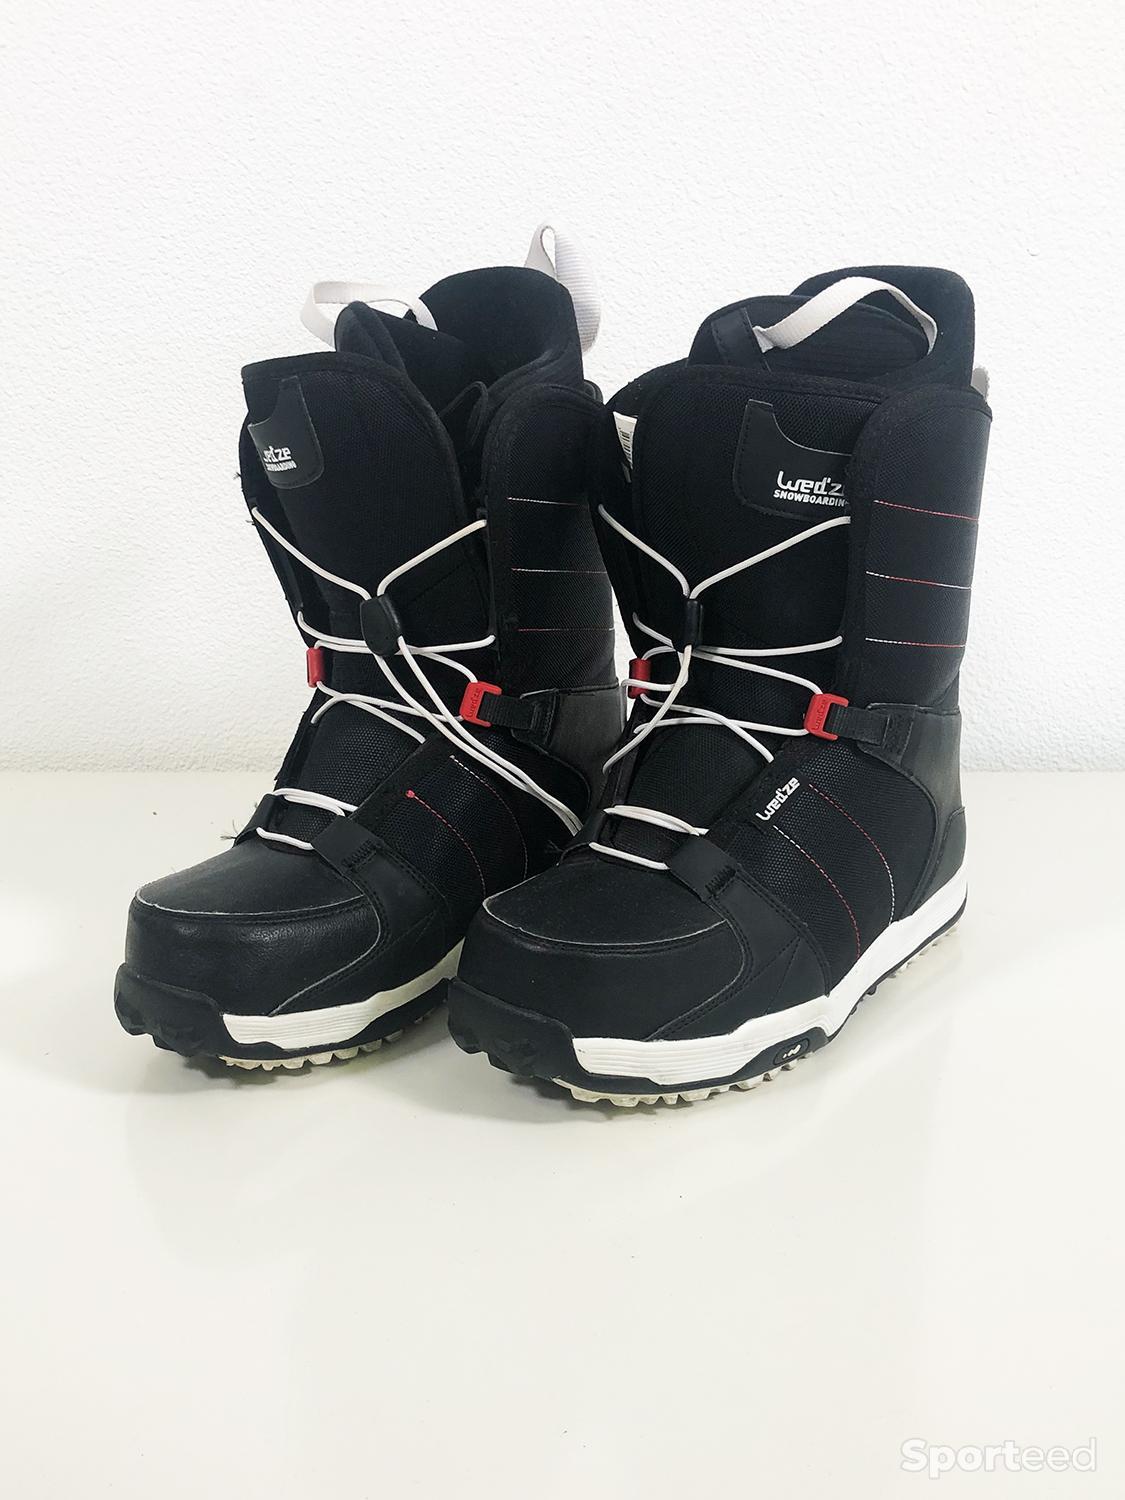 Boots snowboard femme d'occasion taille 8